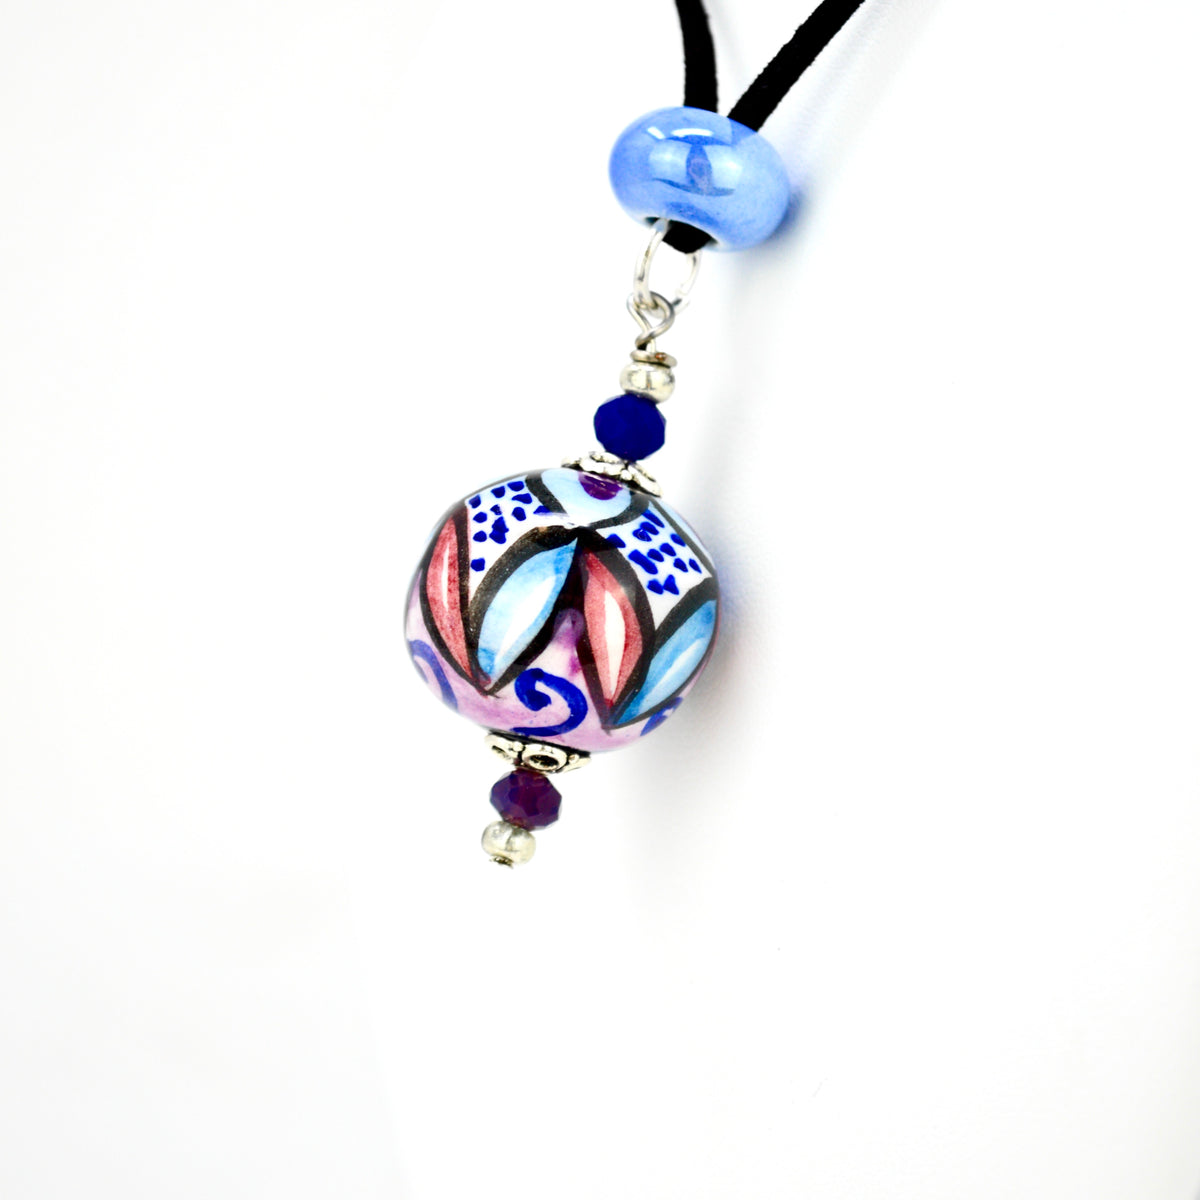 Italian Ceramic Diana Necklace, Red, Blue, Pink, Hand-Crafted In Italy - My Italian Decor